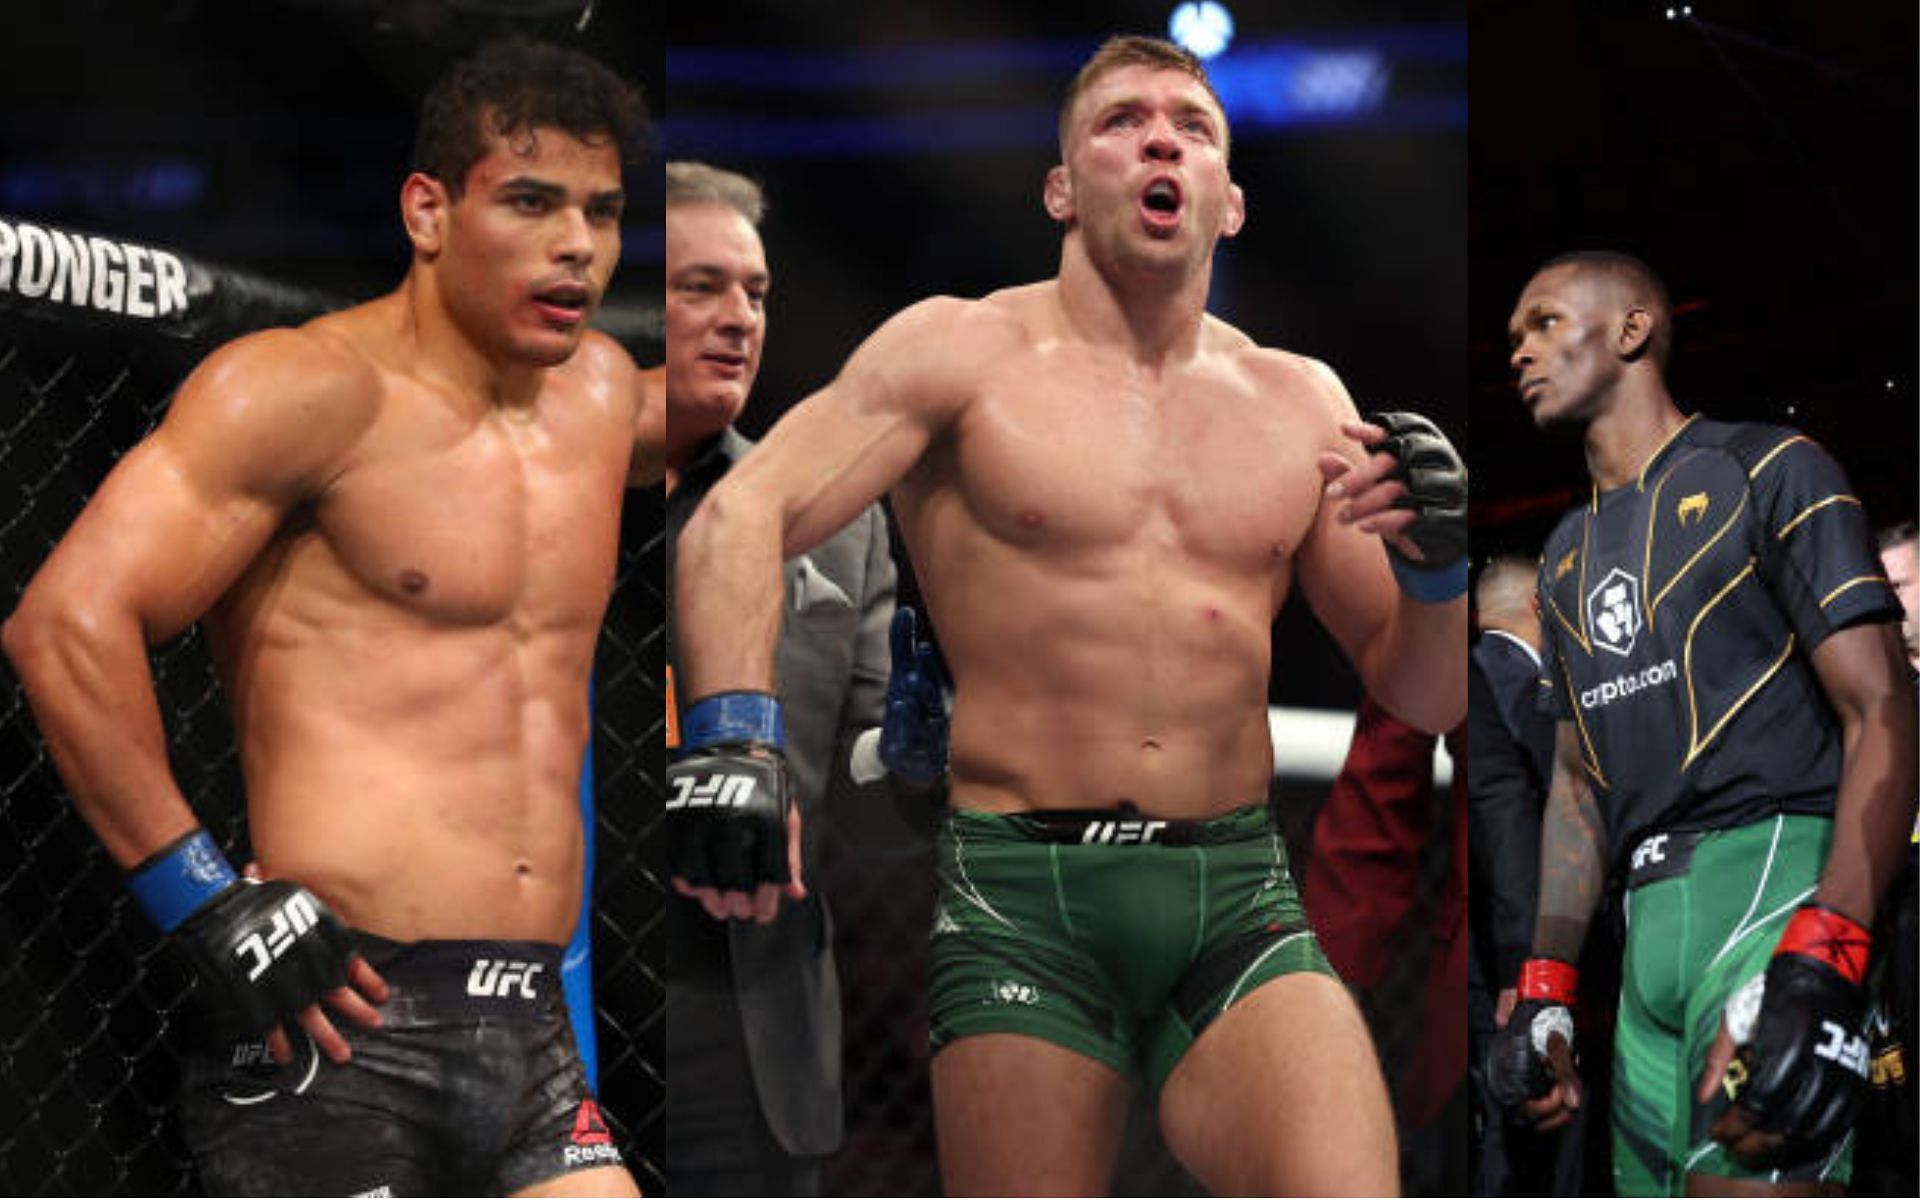 From left to right: Paulo Costa, Dricus du Plessis, and Israel Adesanya